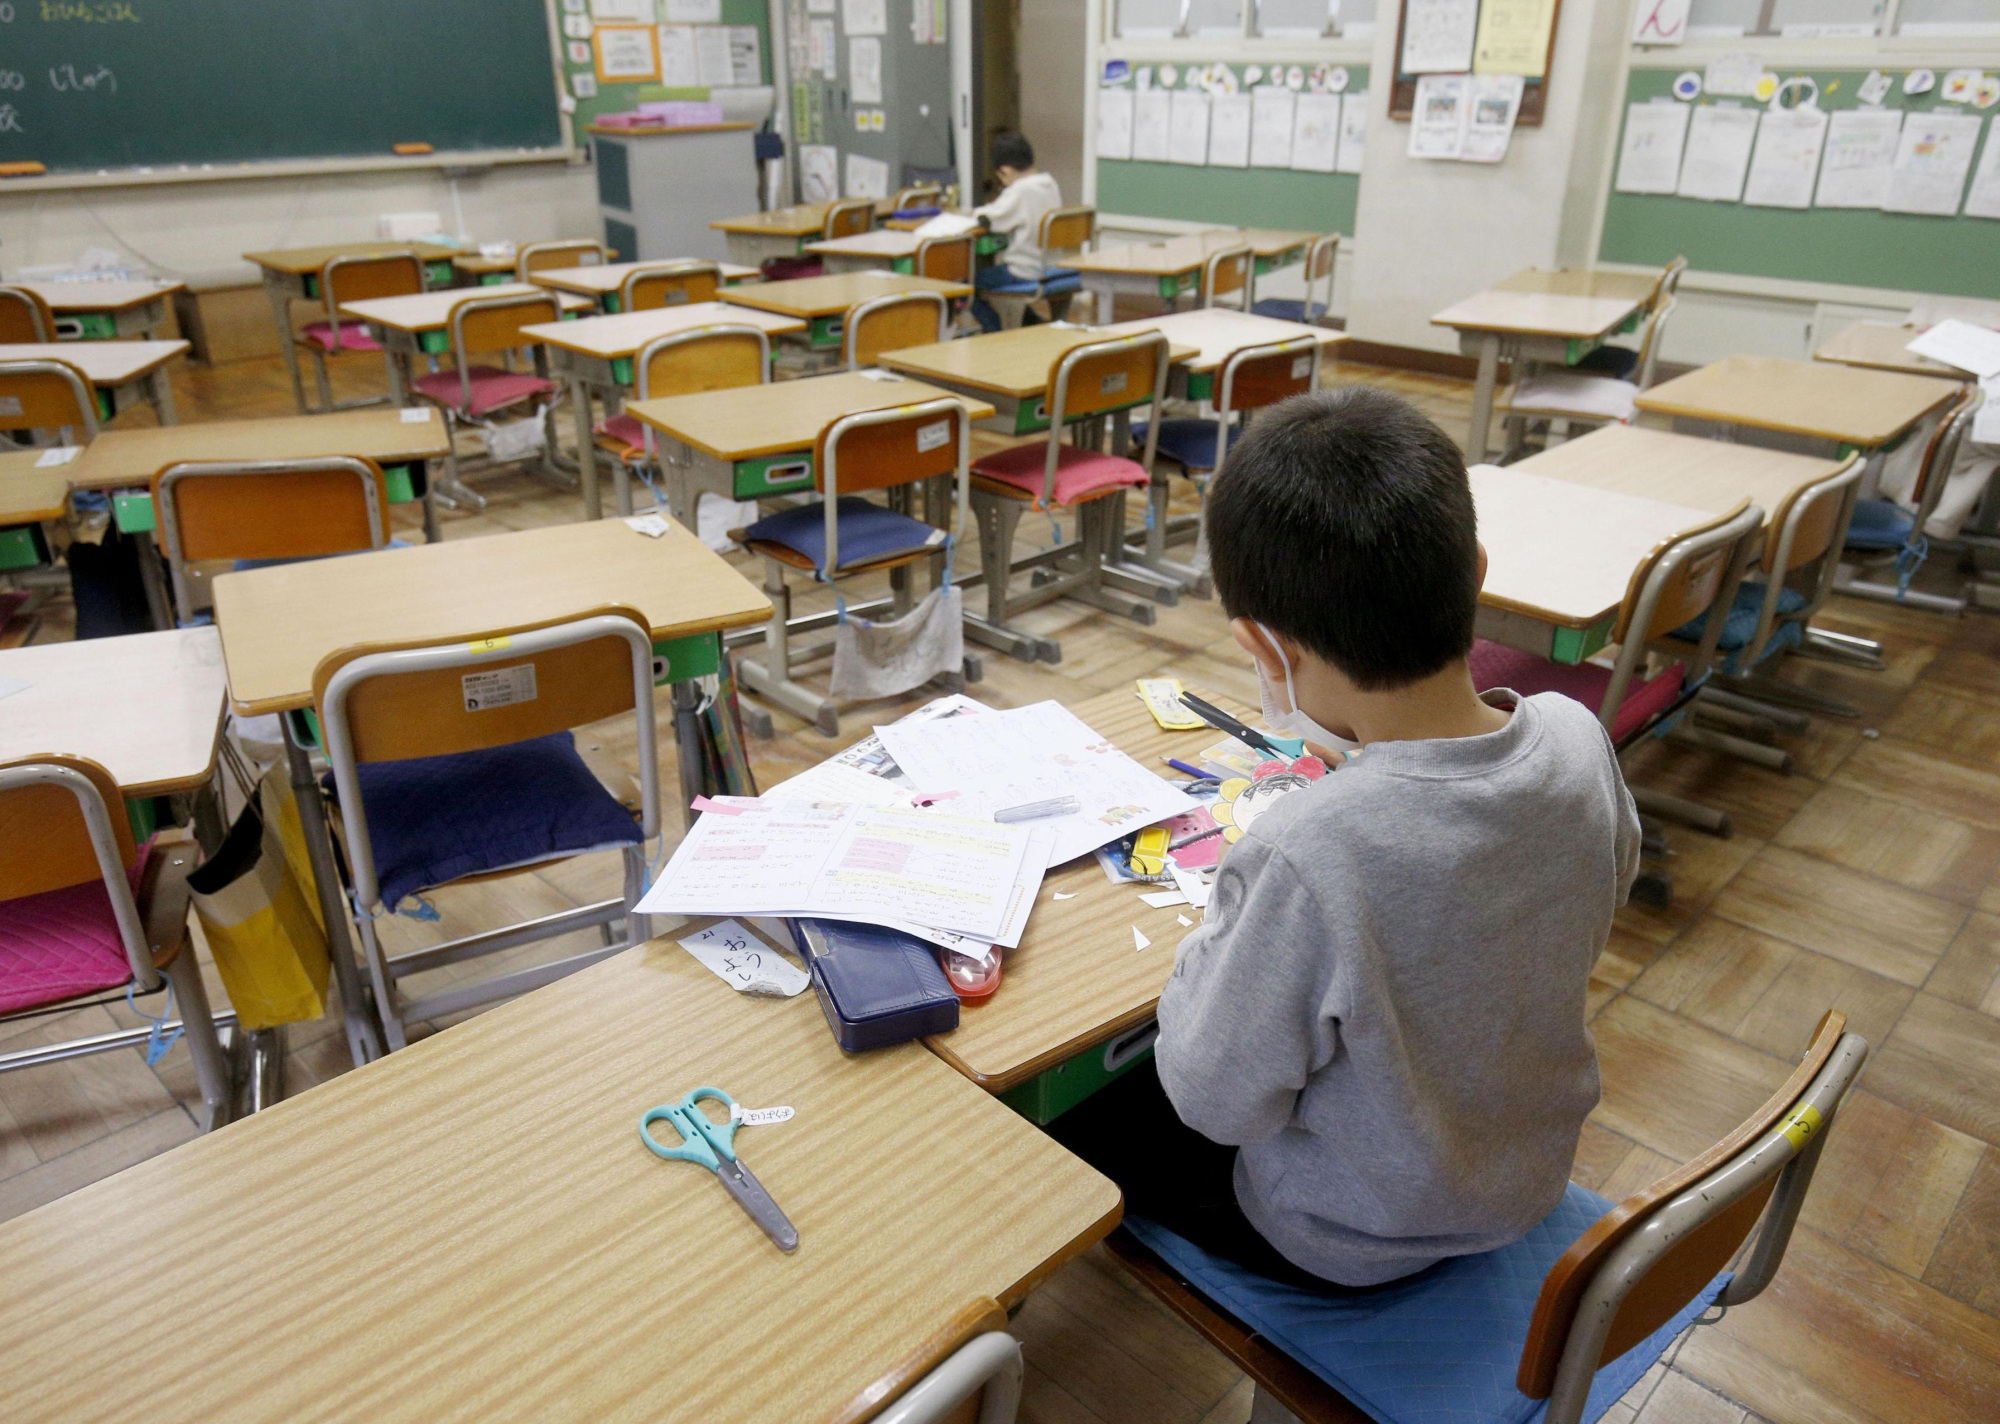 Two students study in an almost empty elementary school classroom in the city of Saitama on Monday. School closures began the same day, but some schools opened their doors for children whose parents were not at home. | KYODO